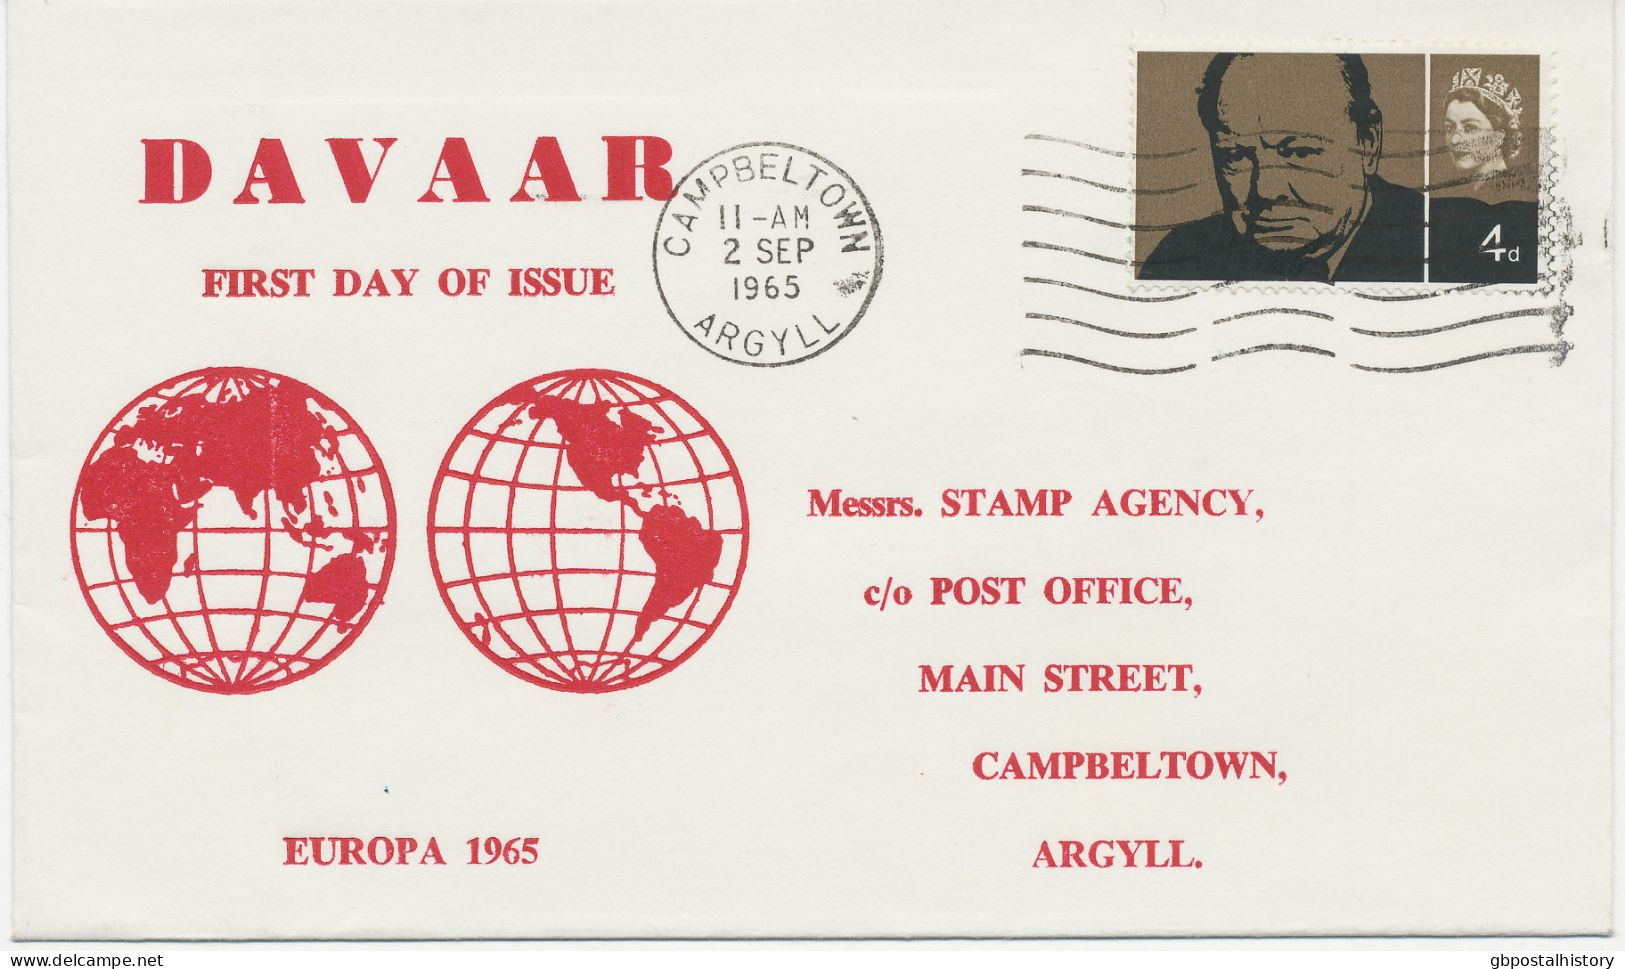 GB Davaar Island COLLECTION 1964/6 7 Different FDC's All Rare EUROPE-CEPT Issues Extremely Rare As Well As Two DIANA FDC - Briefe U. Dokumente